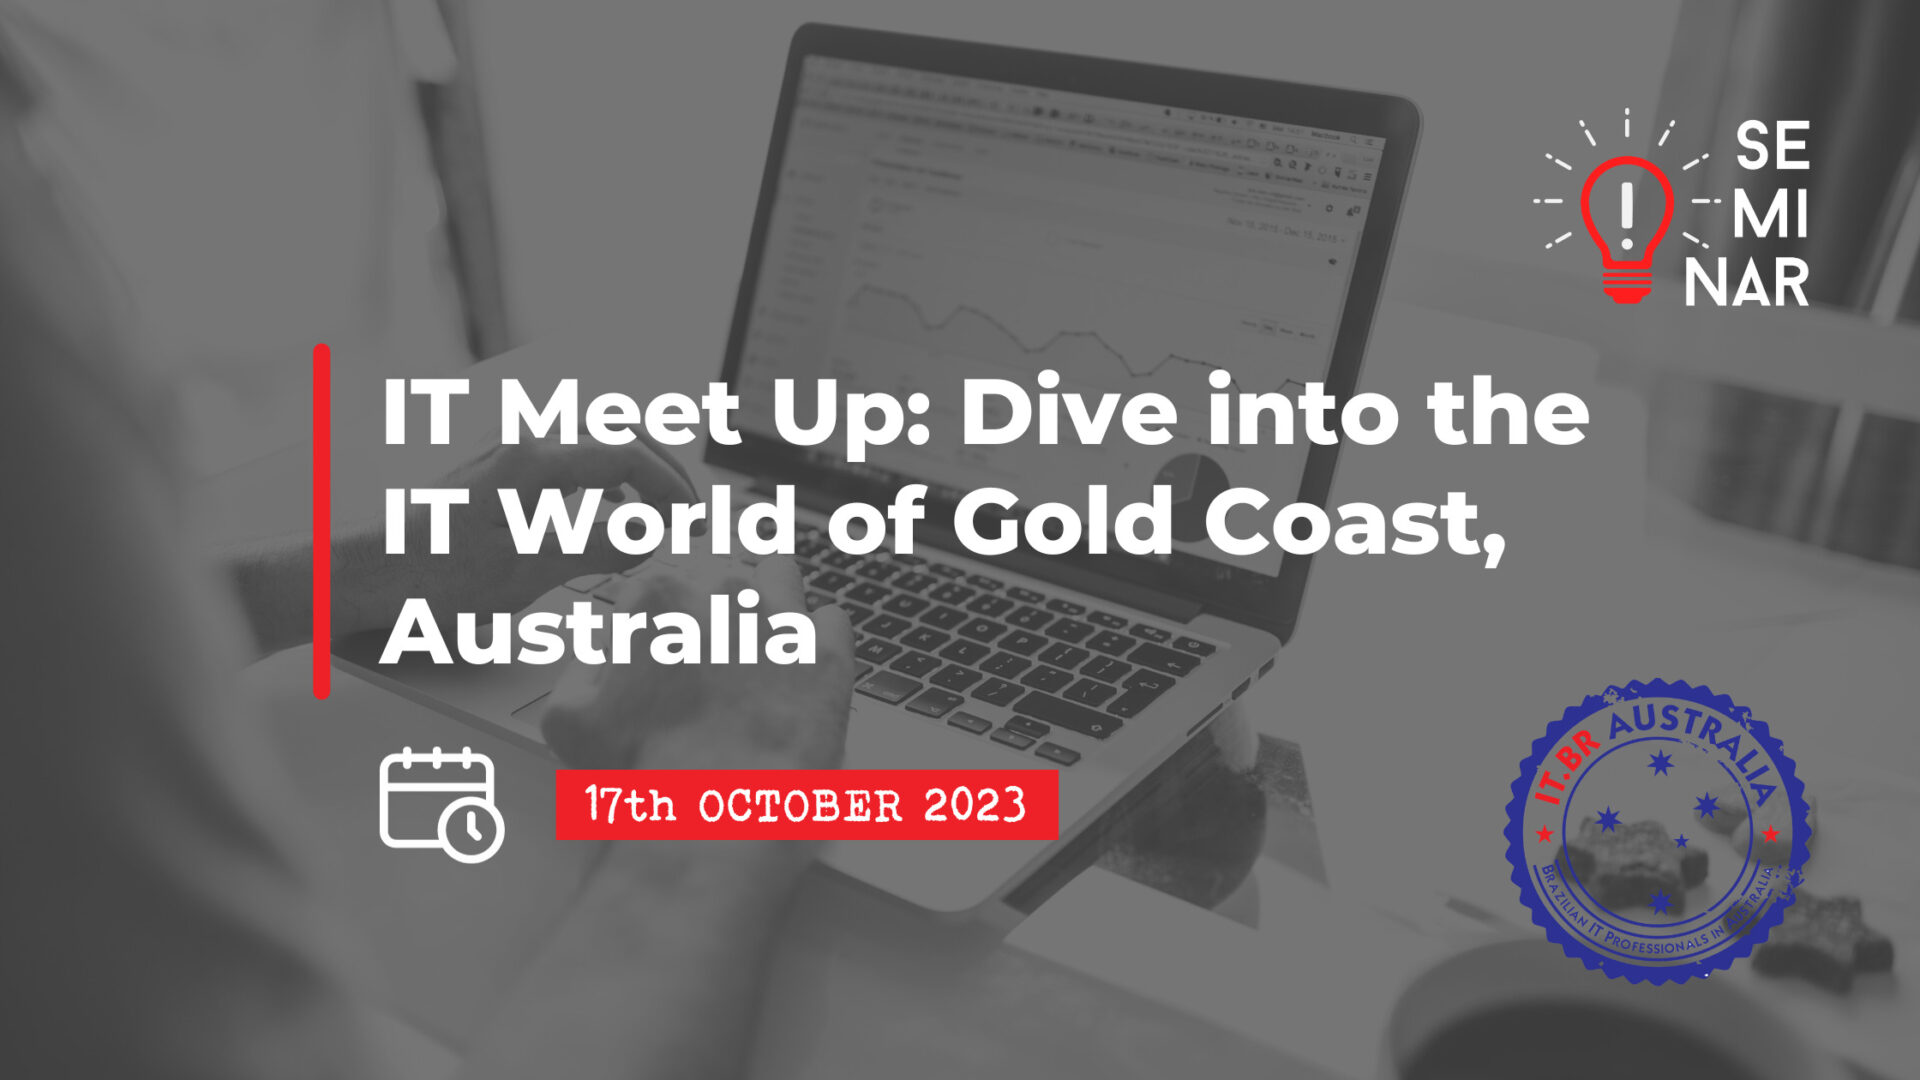 17 October:  Dive into the IT World of Gold Coast, Australia (IT Meet Up)